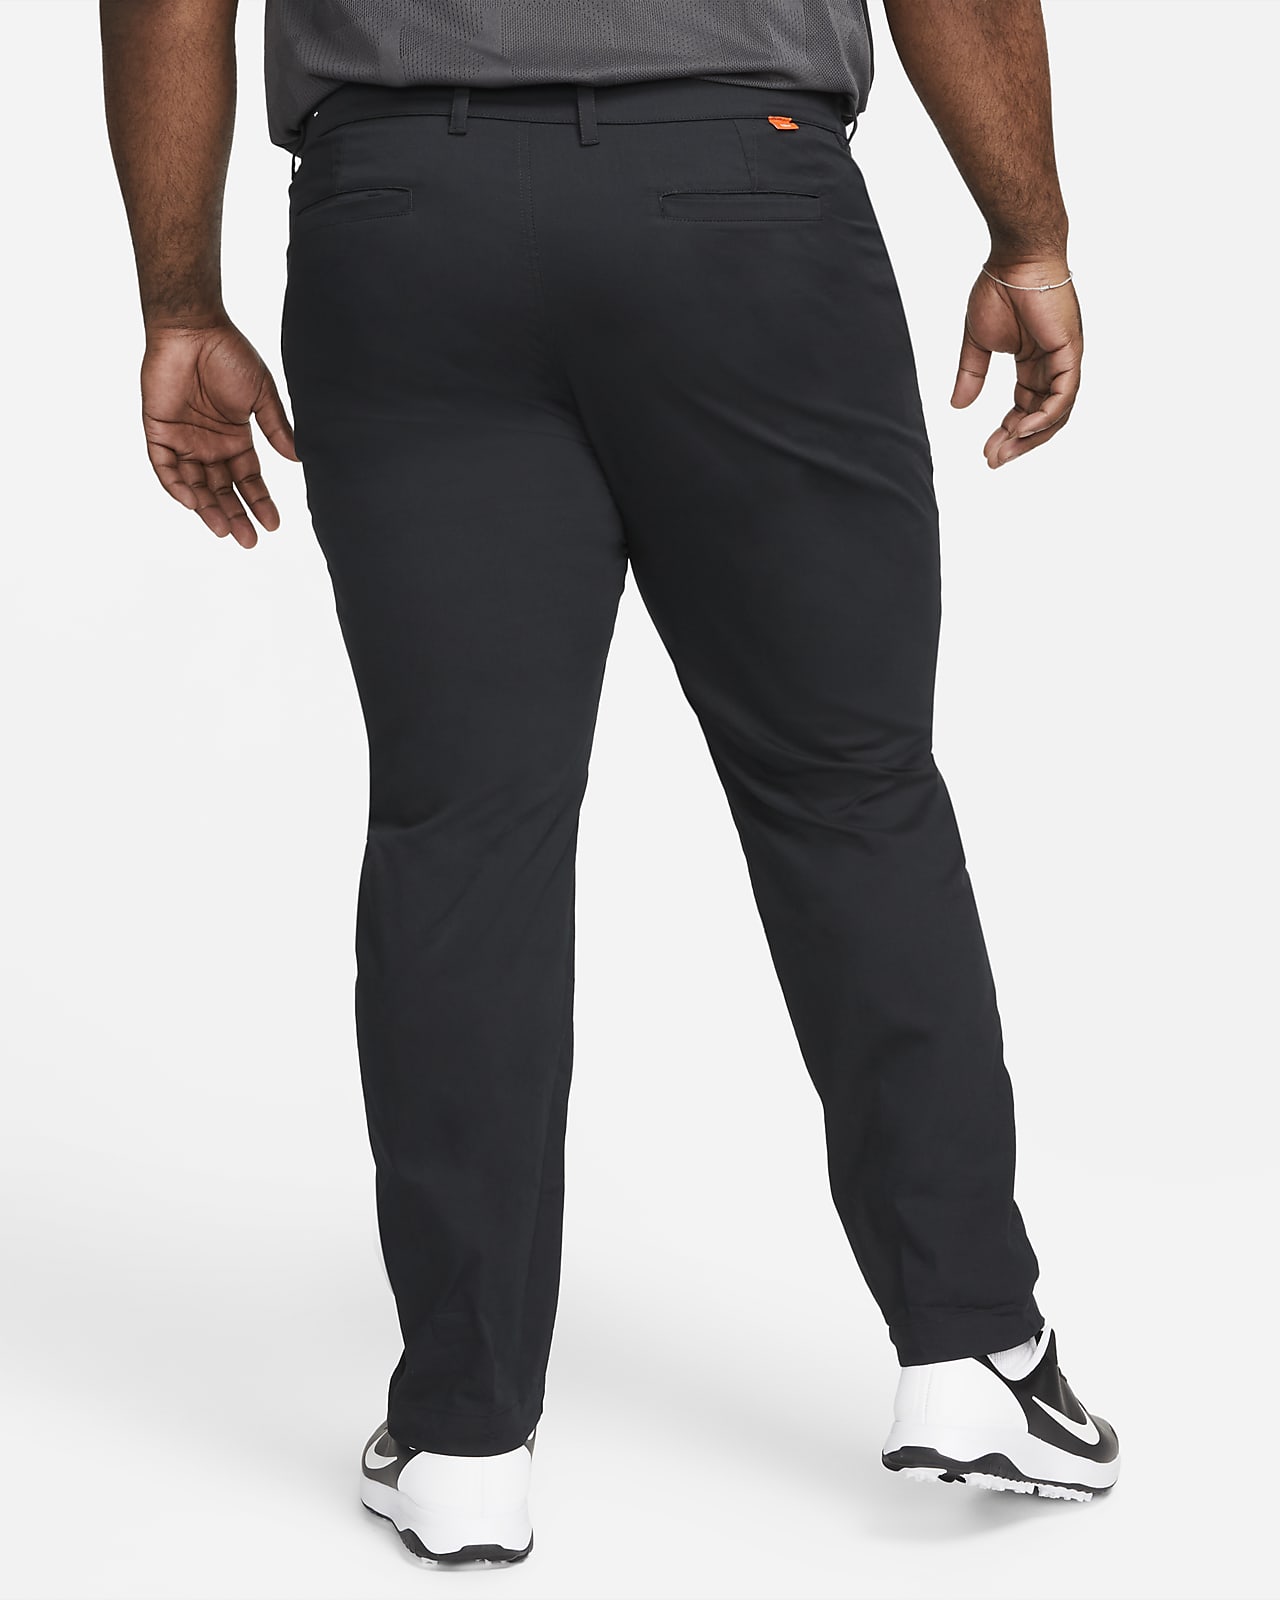 https://static.nike.com/a/images/t_PDP_1280_v1/f_auto,q_auto:eco/79e374b9-b31e-4caf-9f3c-cb67587b5417/dri-fit-uv-slim-fit-golf-chino-trousers-x6nppb.png